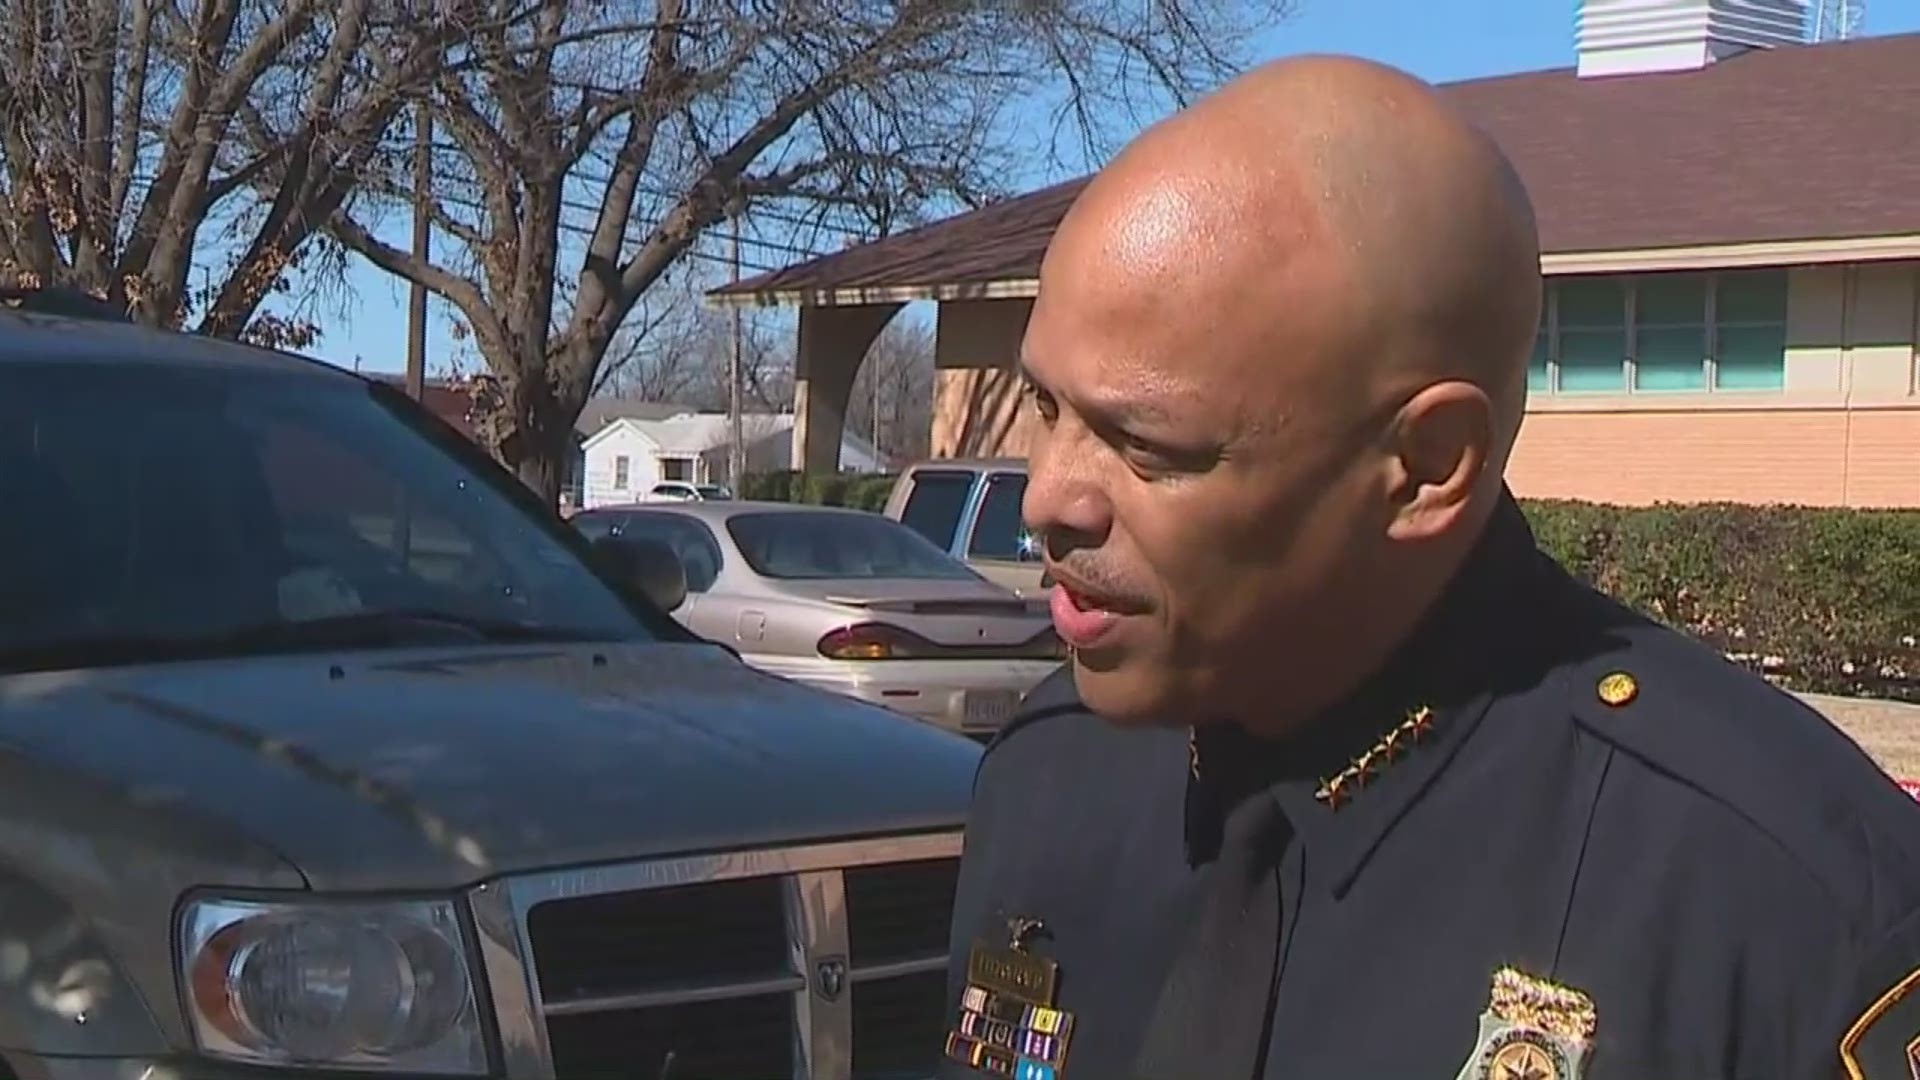 FWPD Chief Fitzgerald speaks about arrest charges being dropped